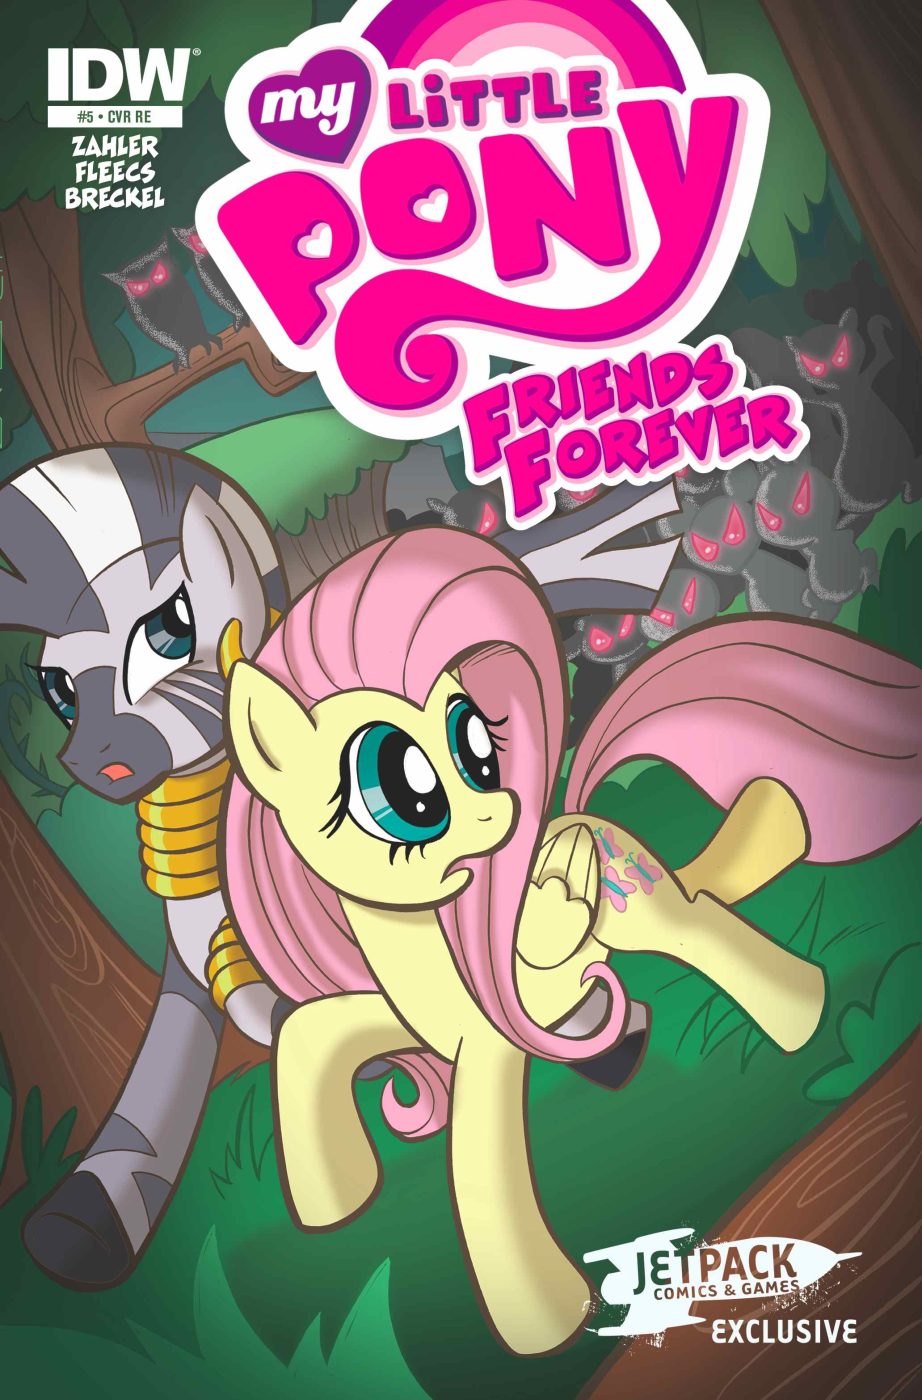 My Little Pony Friends Forever #5 (Jetpack Exclusive A )